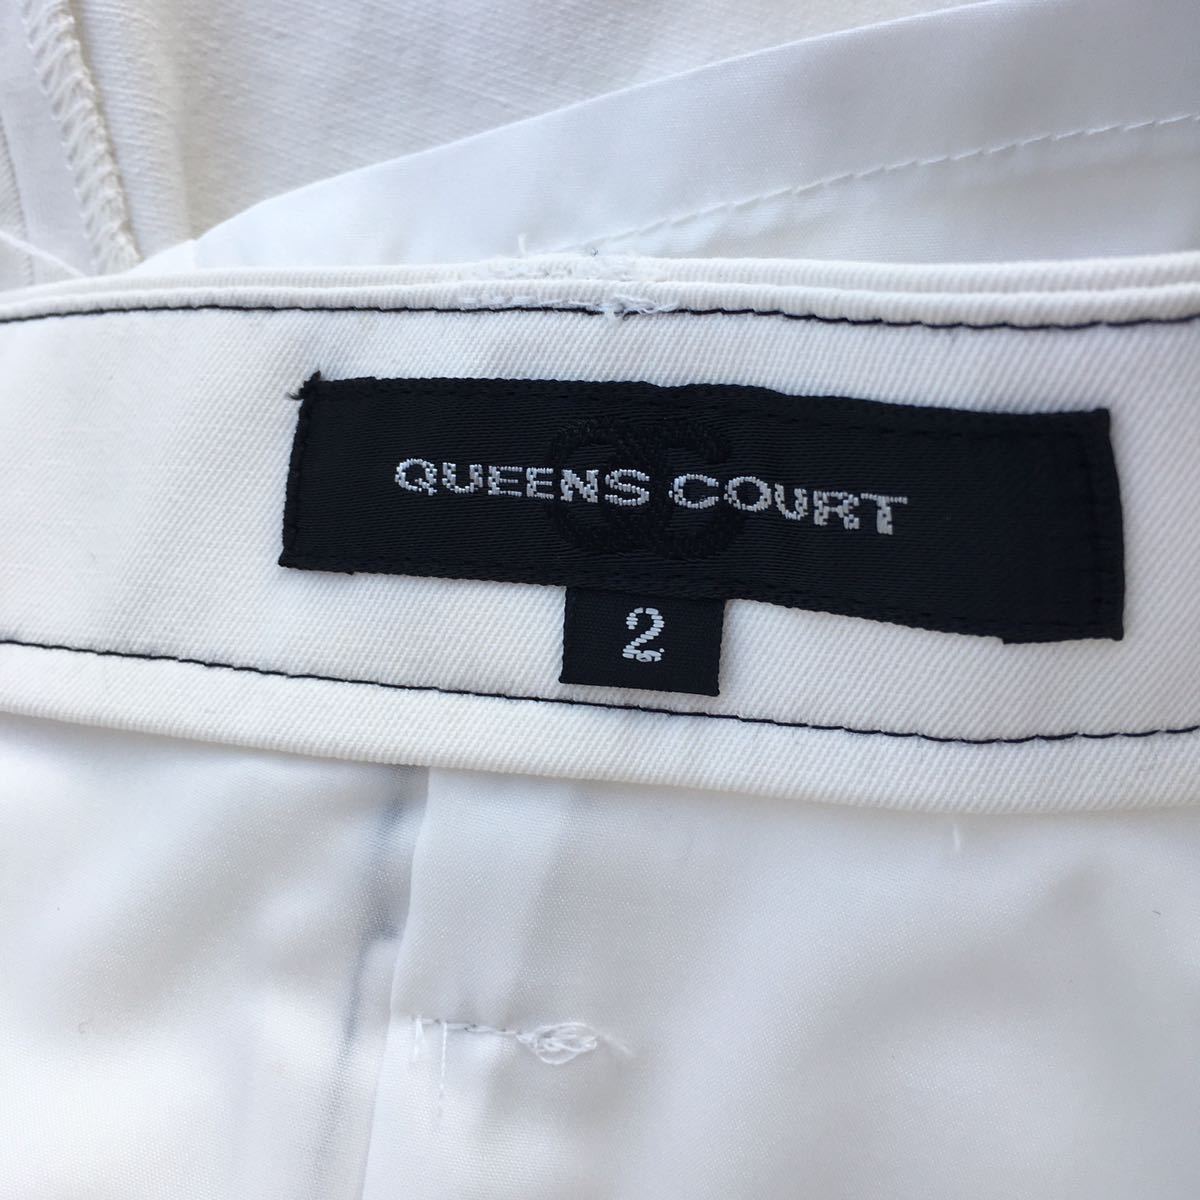  new goods tag not yet arrived QUEENS COURT Queens Court color scheme stitch to wrench skirt 2018AW size 2 off white regular price,18.000+ tax 